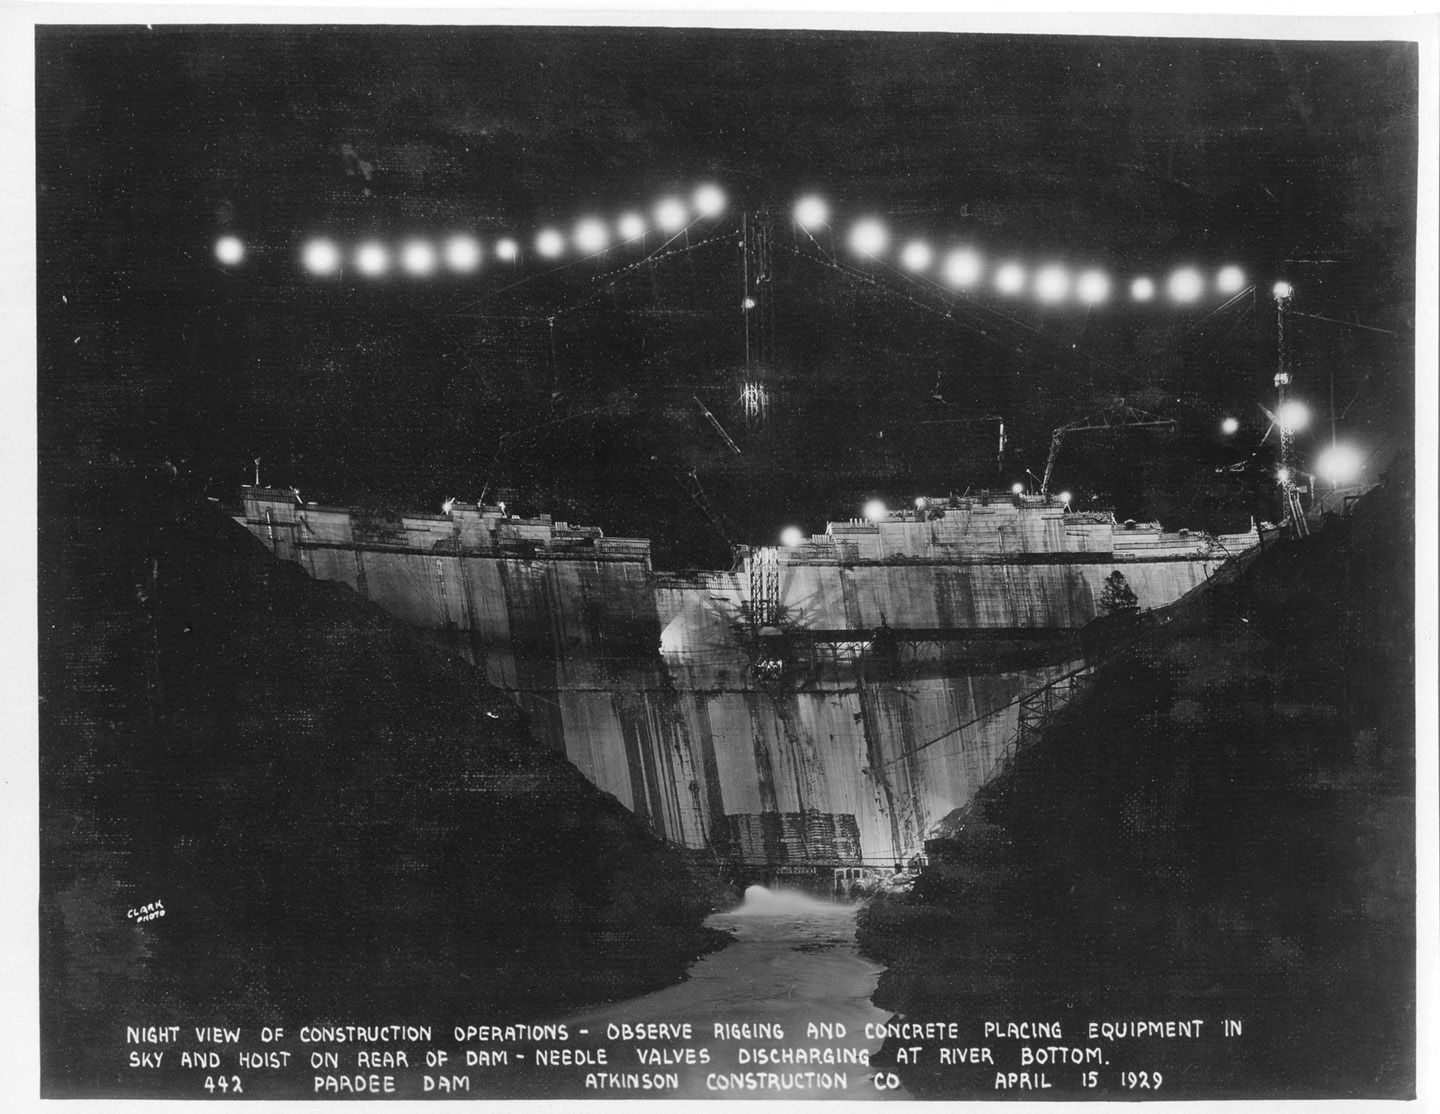 Night view of construction operations - observe rigging and concrete placing of equipment in sky an hoist on rear of dam - needle valves discharging at river bottom. (April 1929)